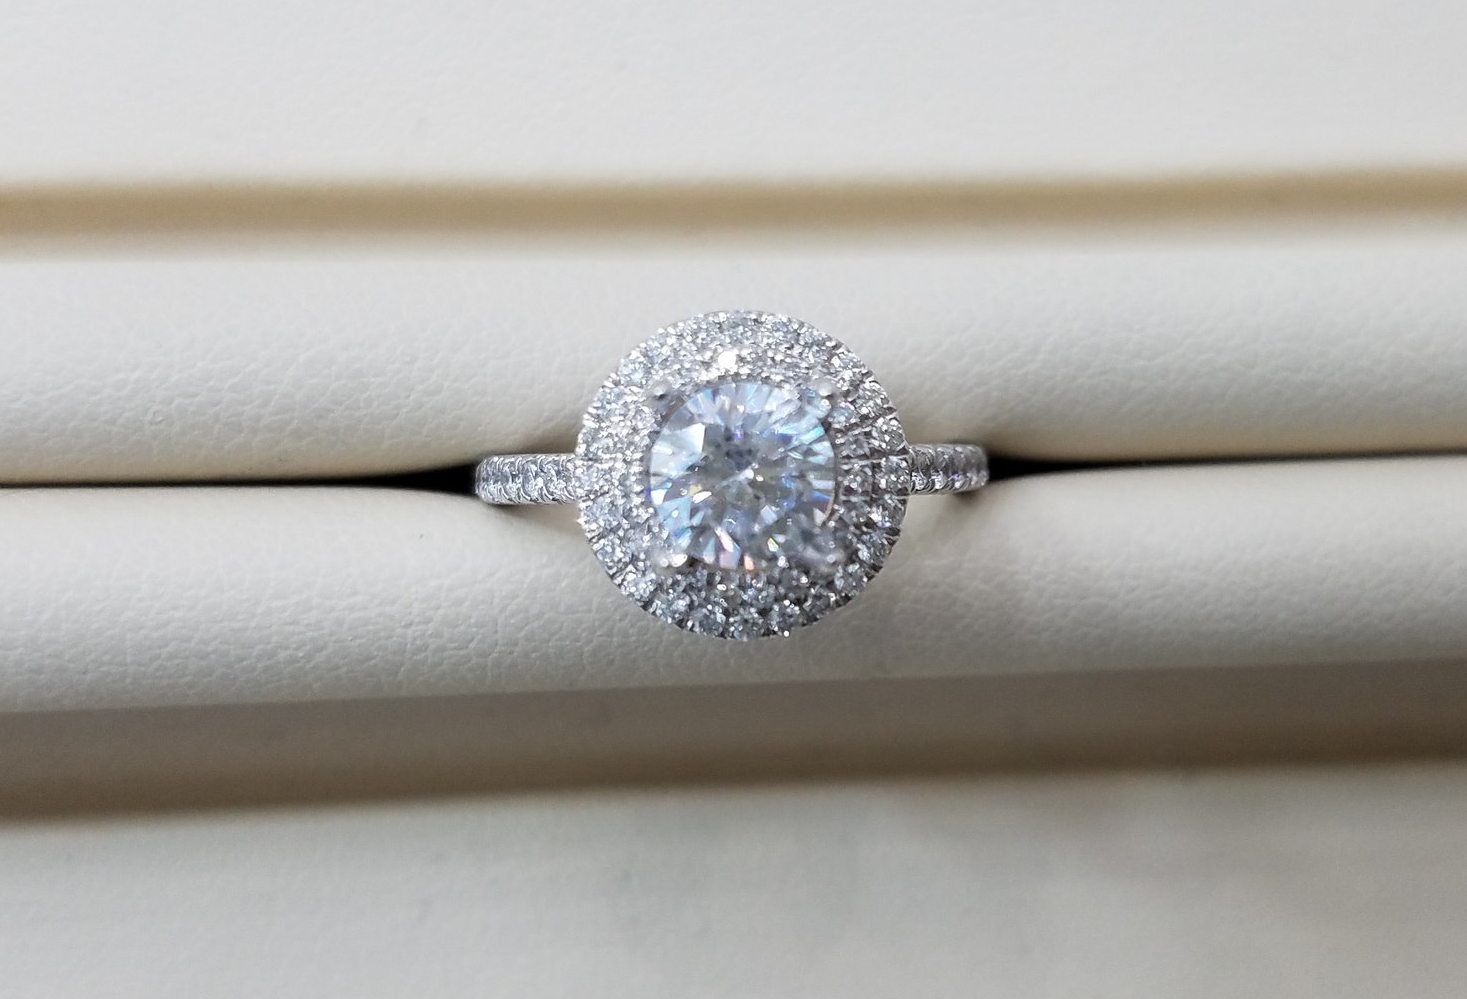 Double halo engagement ring round.jpg